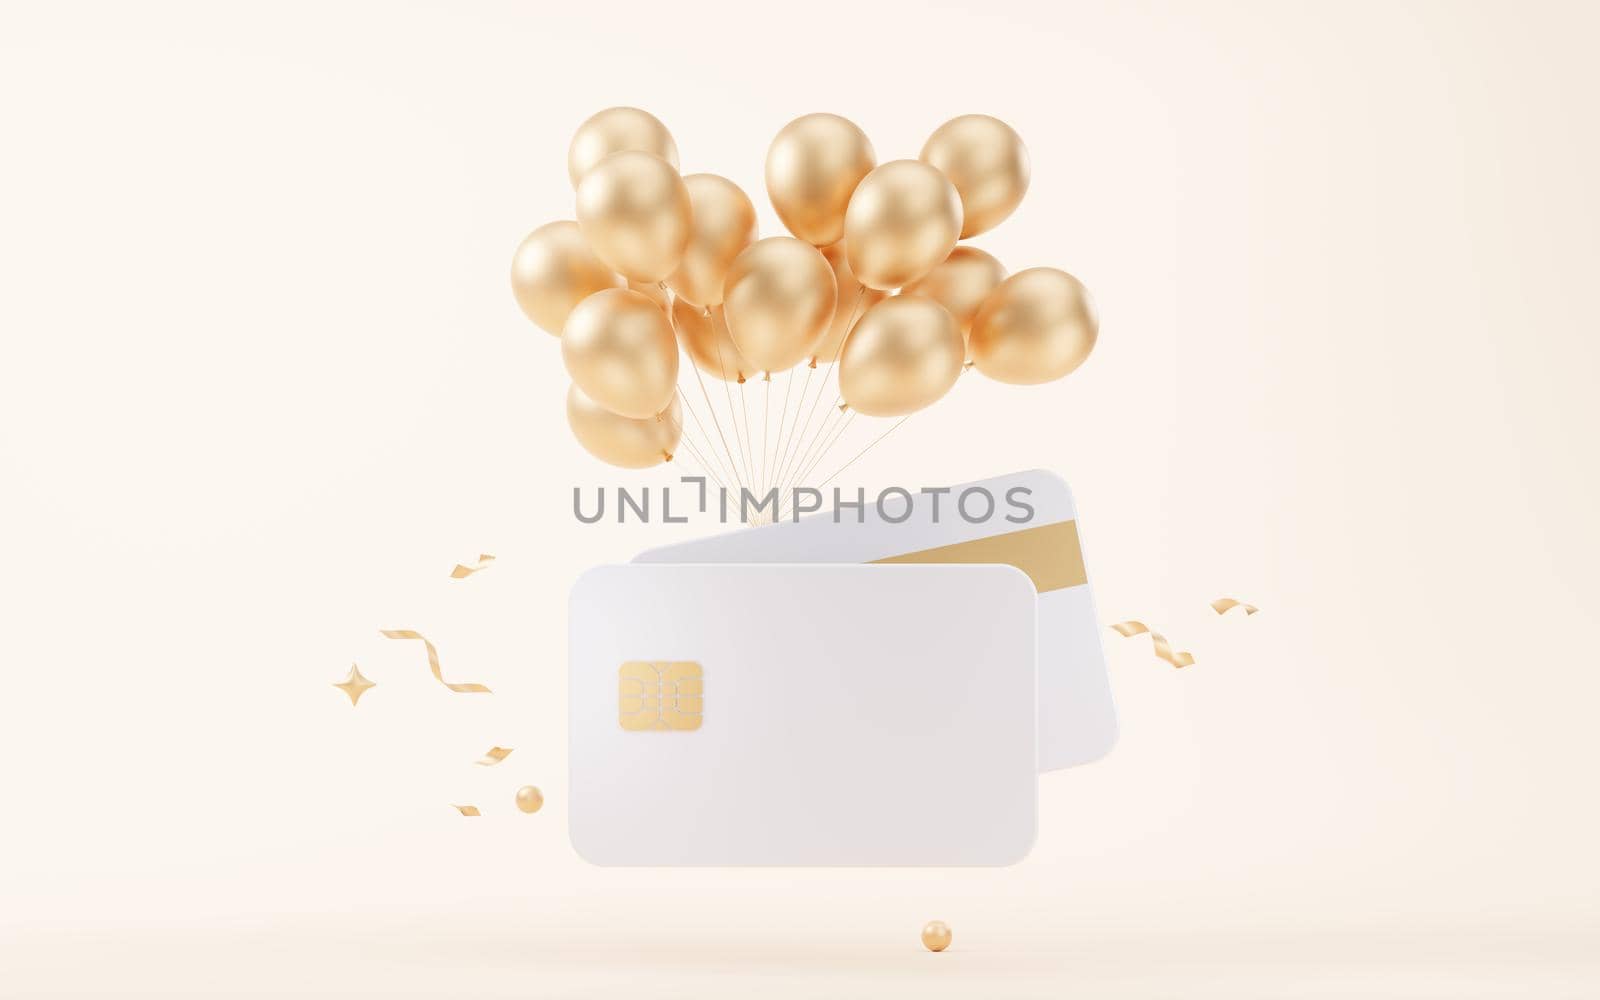 Bank card and balloons, 3d rendering. by vinkfan